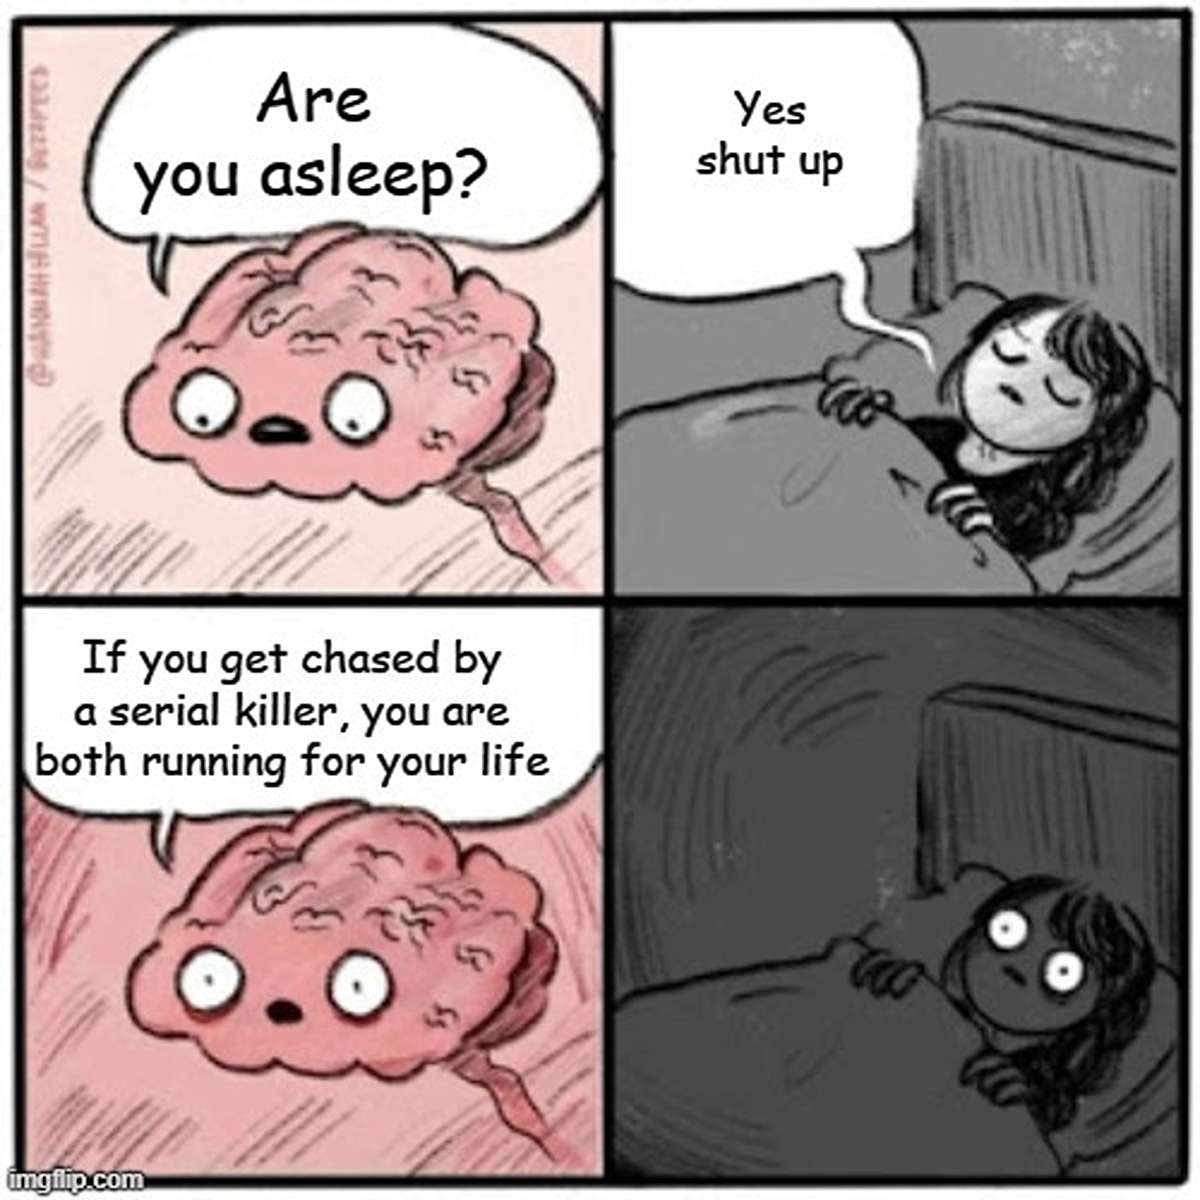 dank memes - hey are you sleeping brain - 43329Wth Are you asleep? Q.Q If you get chased by a serial killer, you are both running for your life imgflip.com Yes shut up two